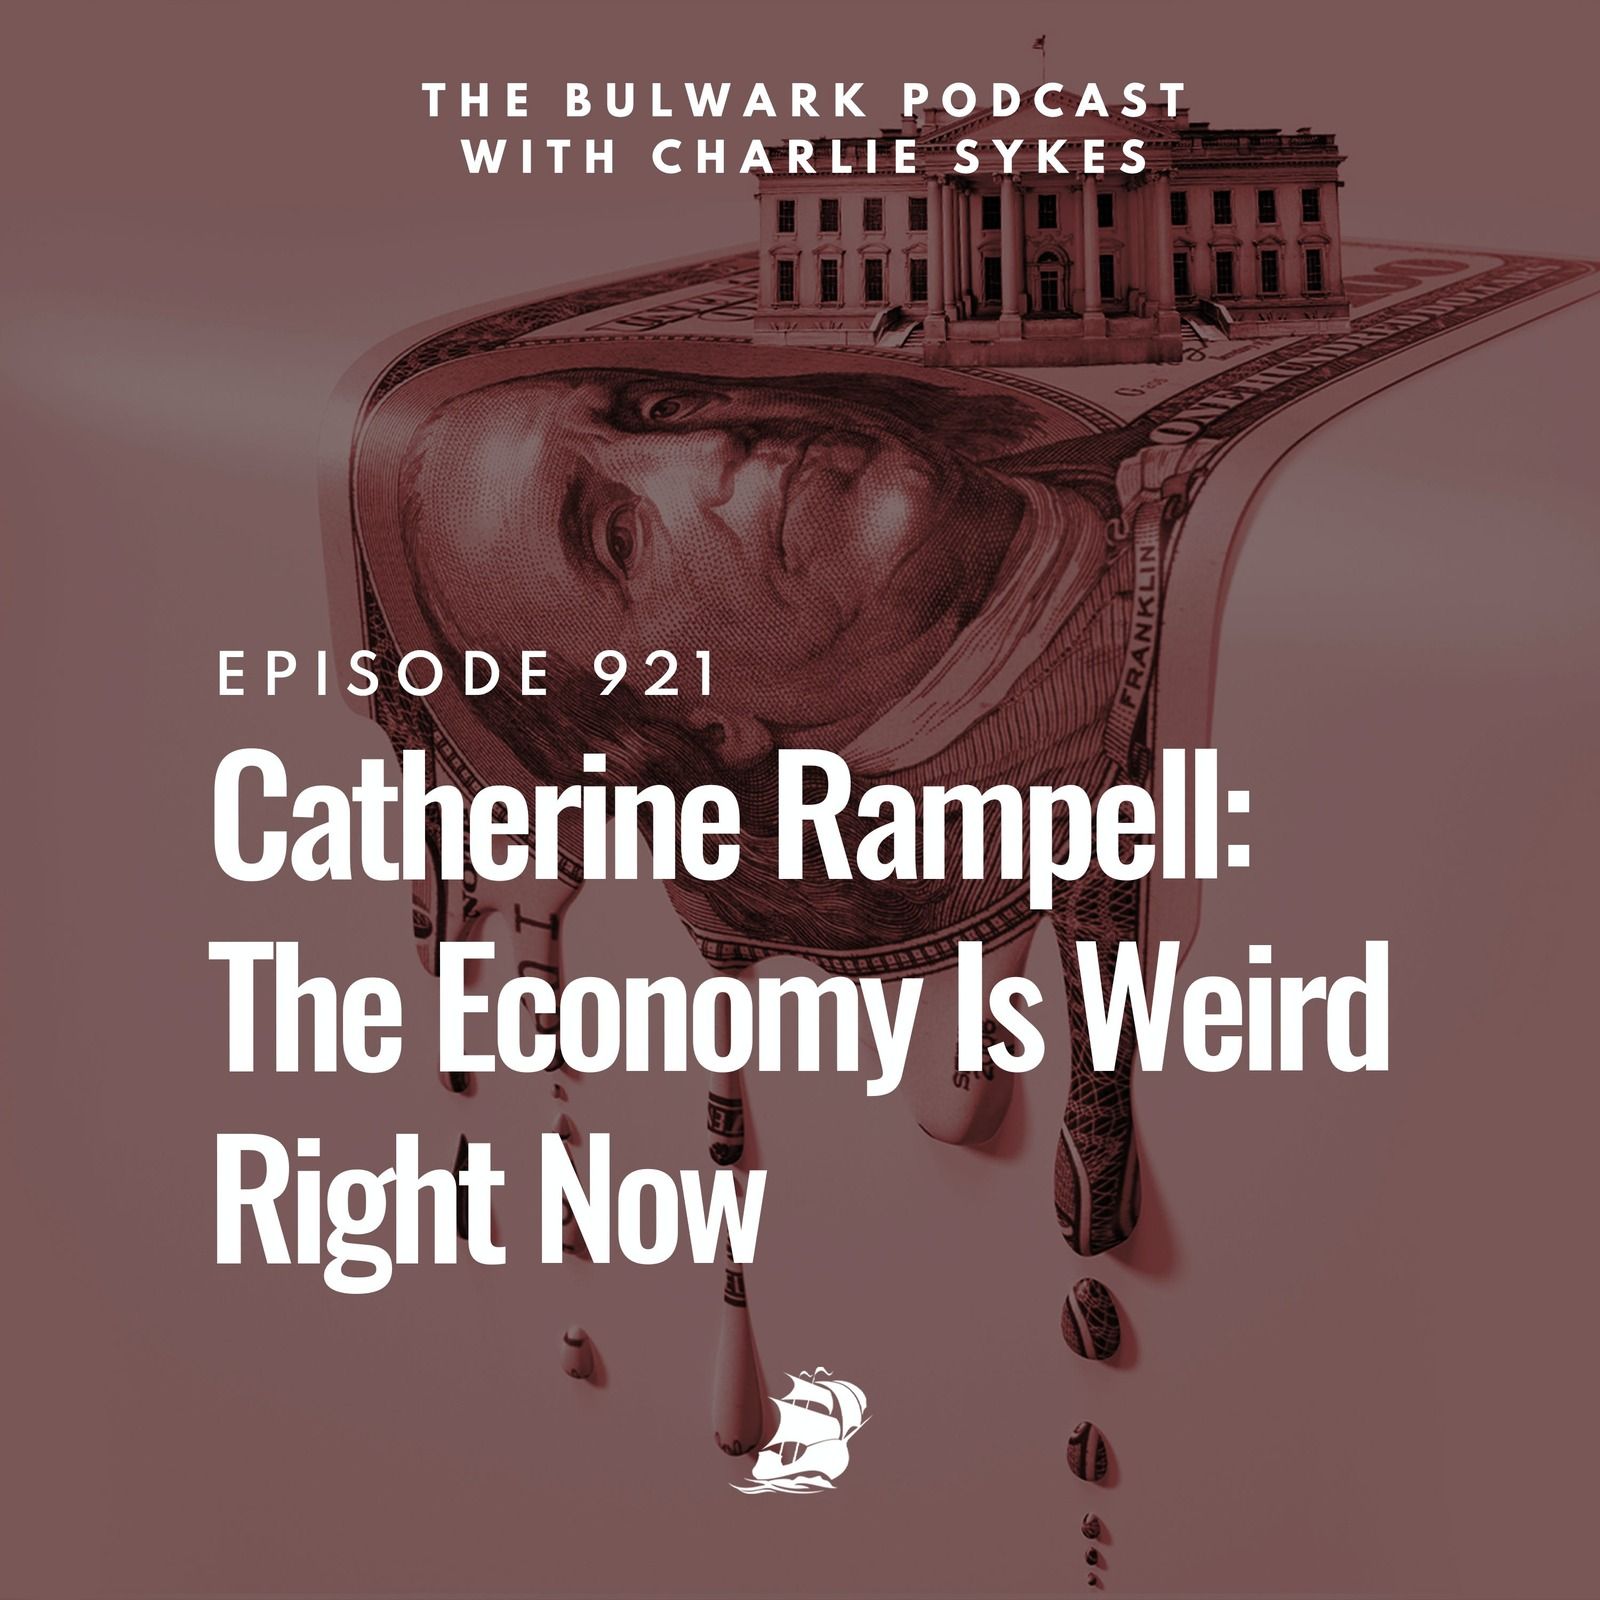 Catherine Rampell: The Economy Is Weird Right Now by The Bulwark Podcast